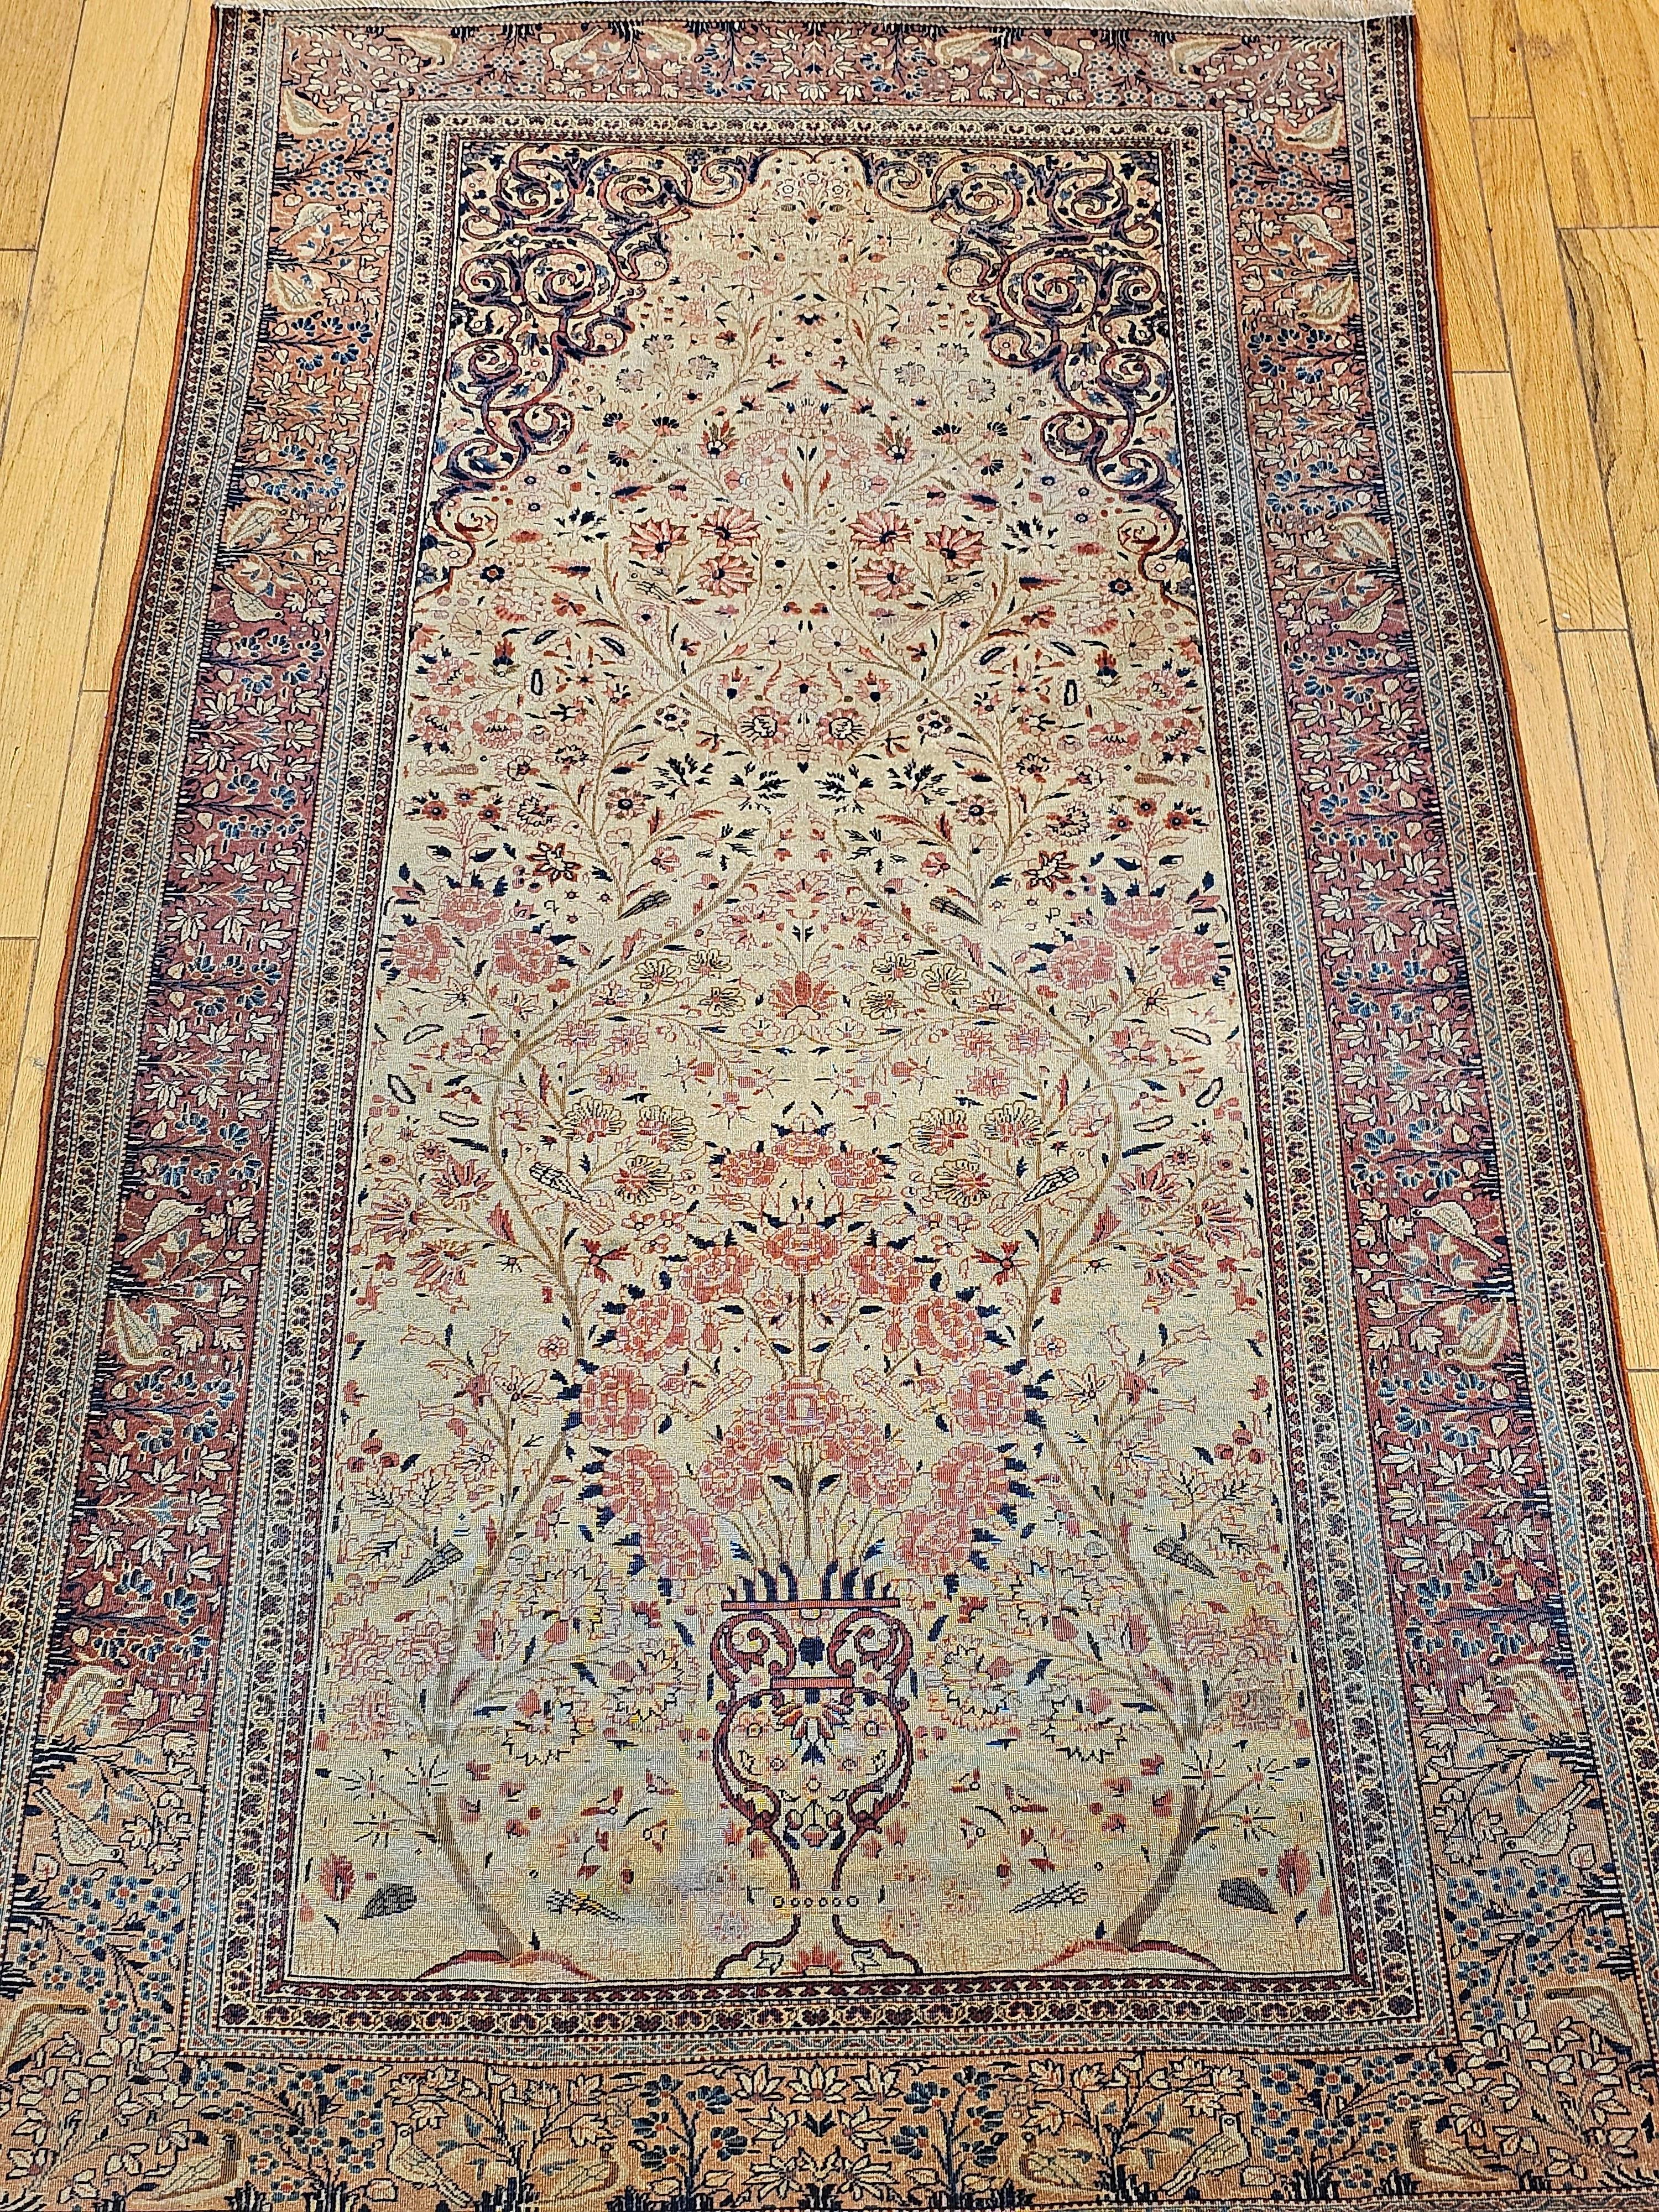 19th Century Persian Kashan “Tree of Life” Vase Rug in Ivory, Brick Red, Navy For Sale 5